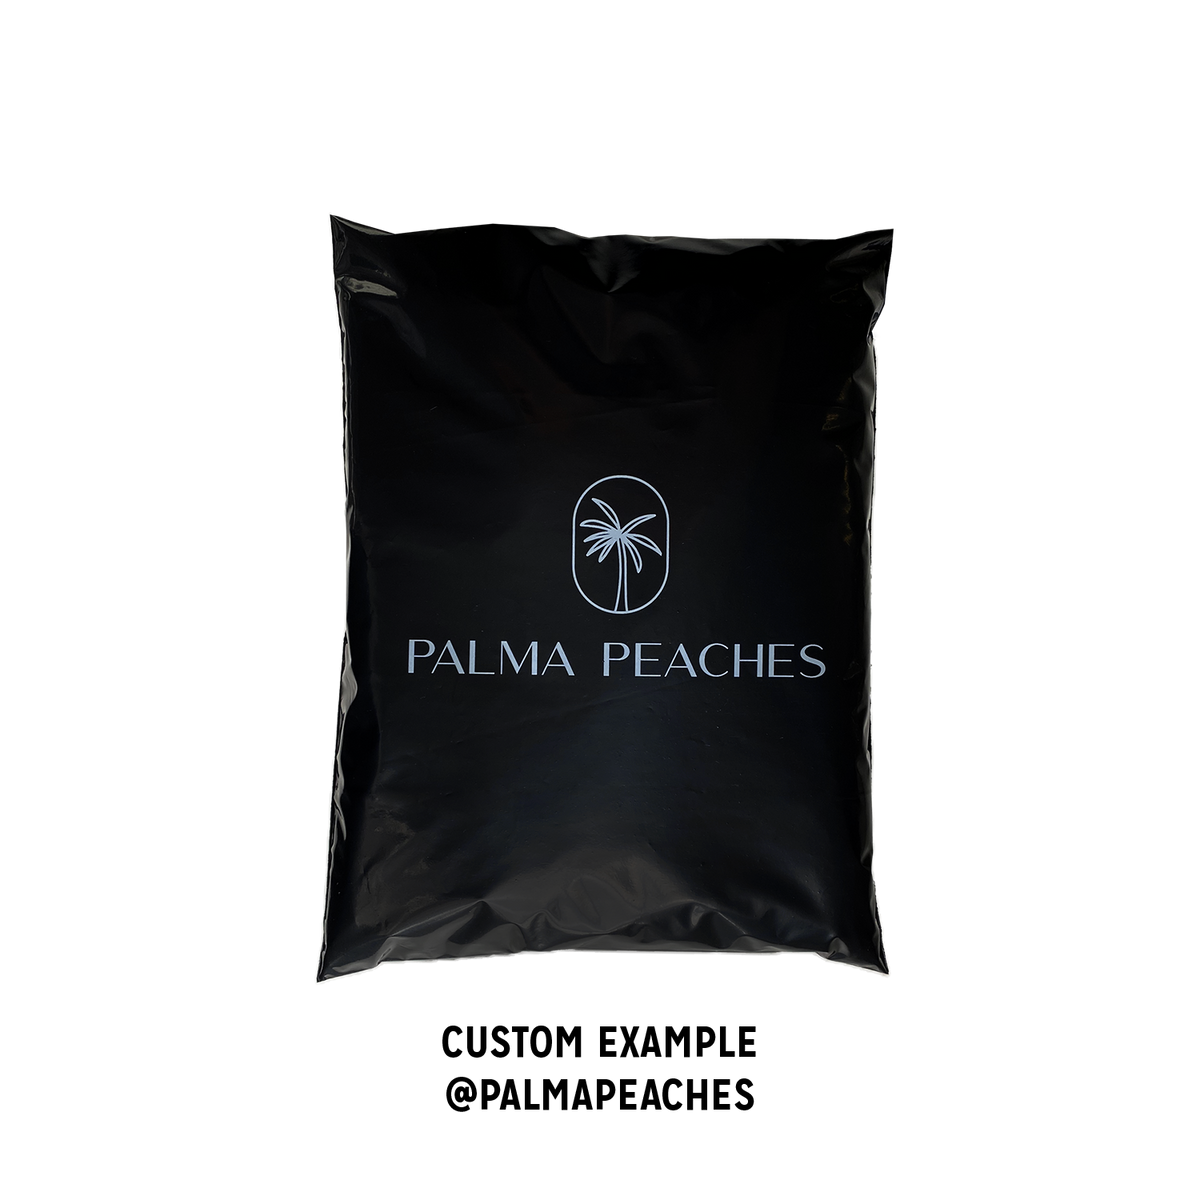 Palma Peaches branded custom Better Packaging POLLAST!C black mailer on a transparent background